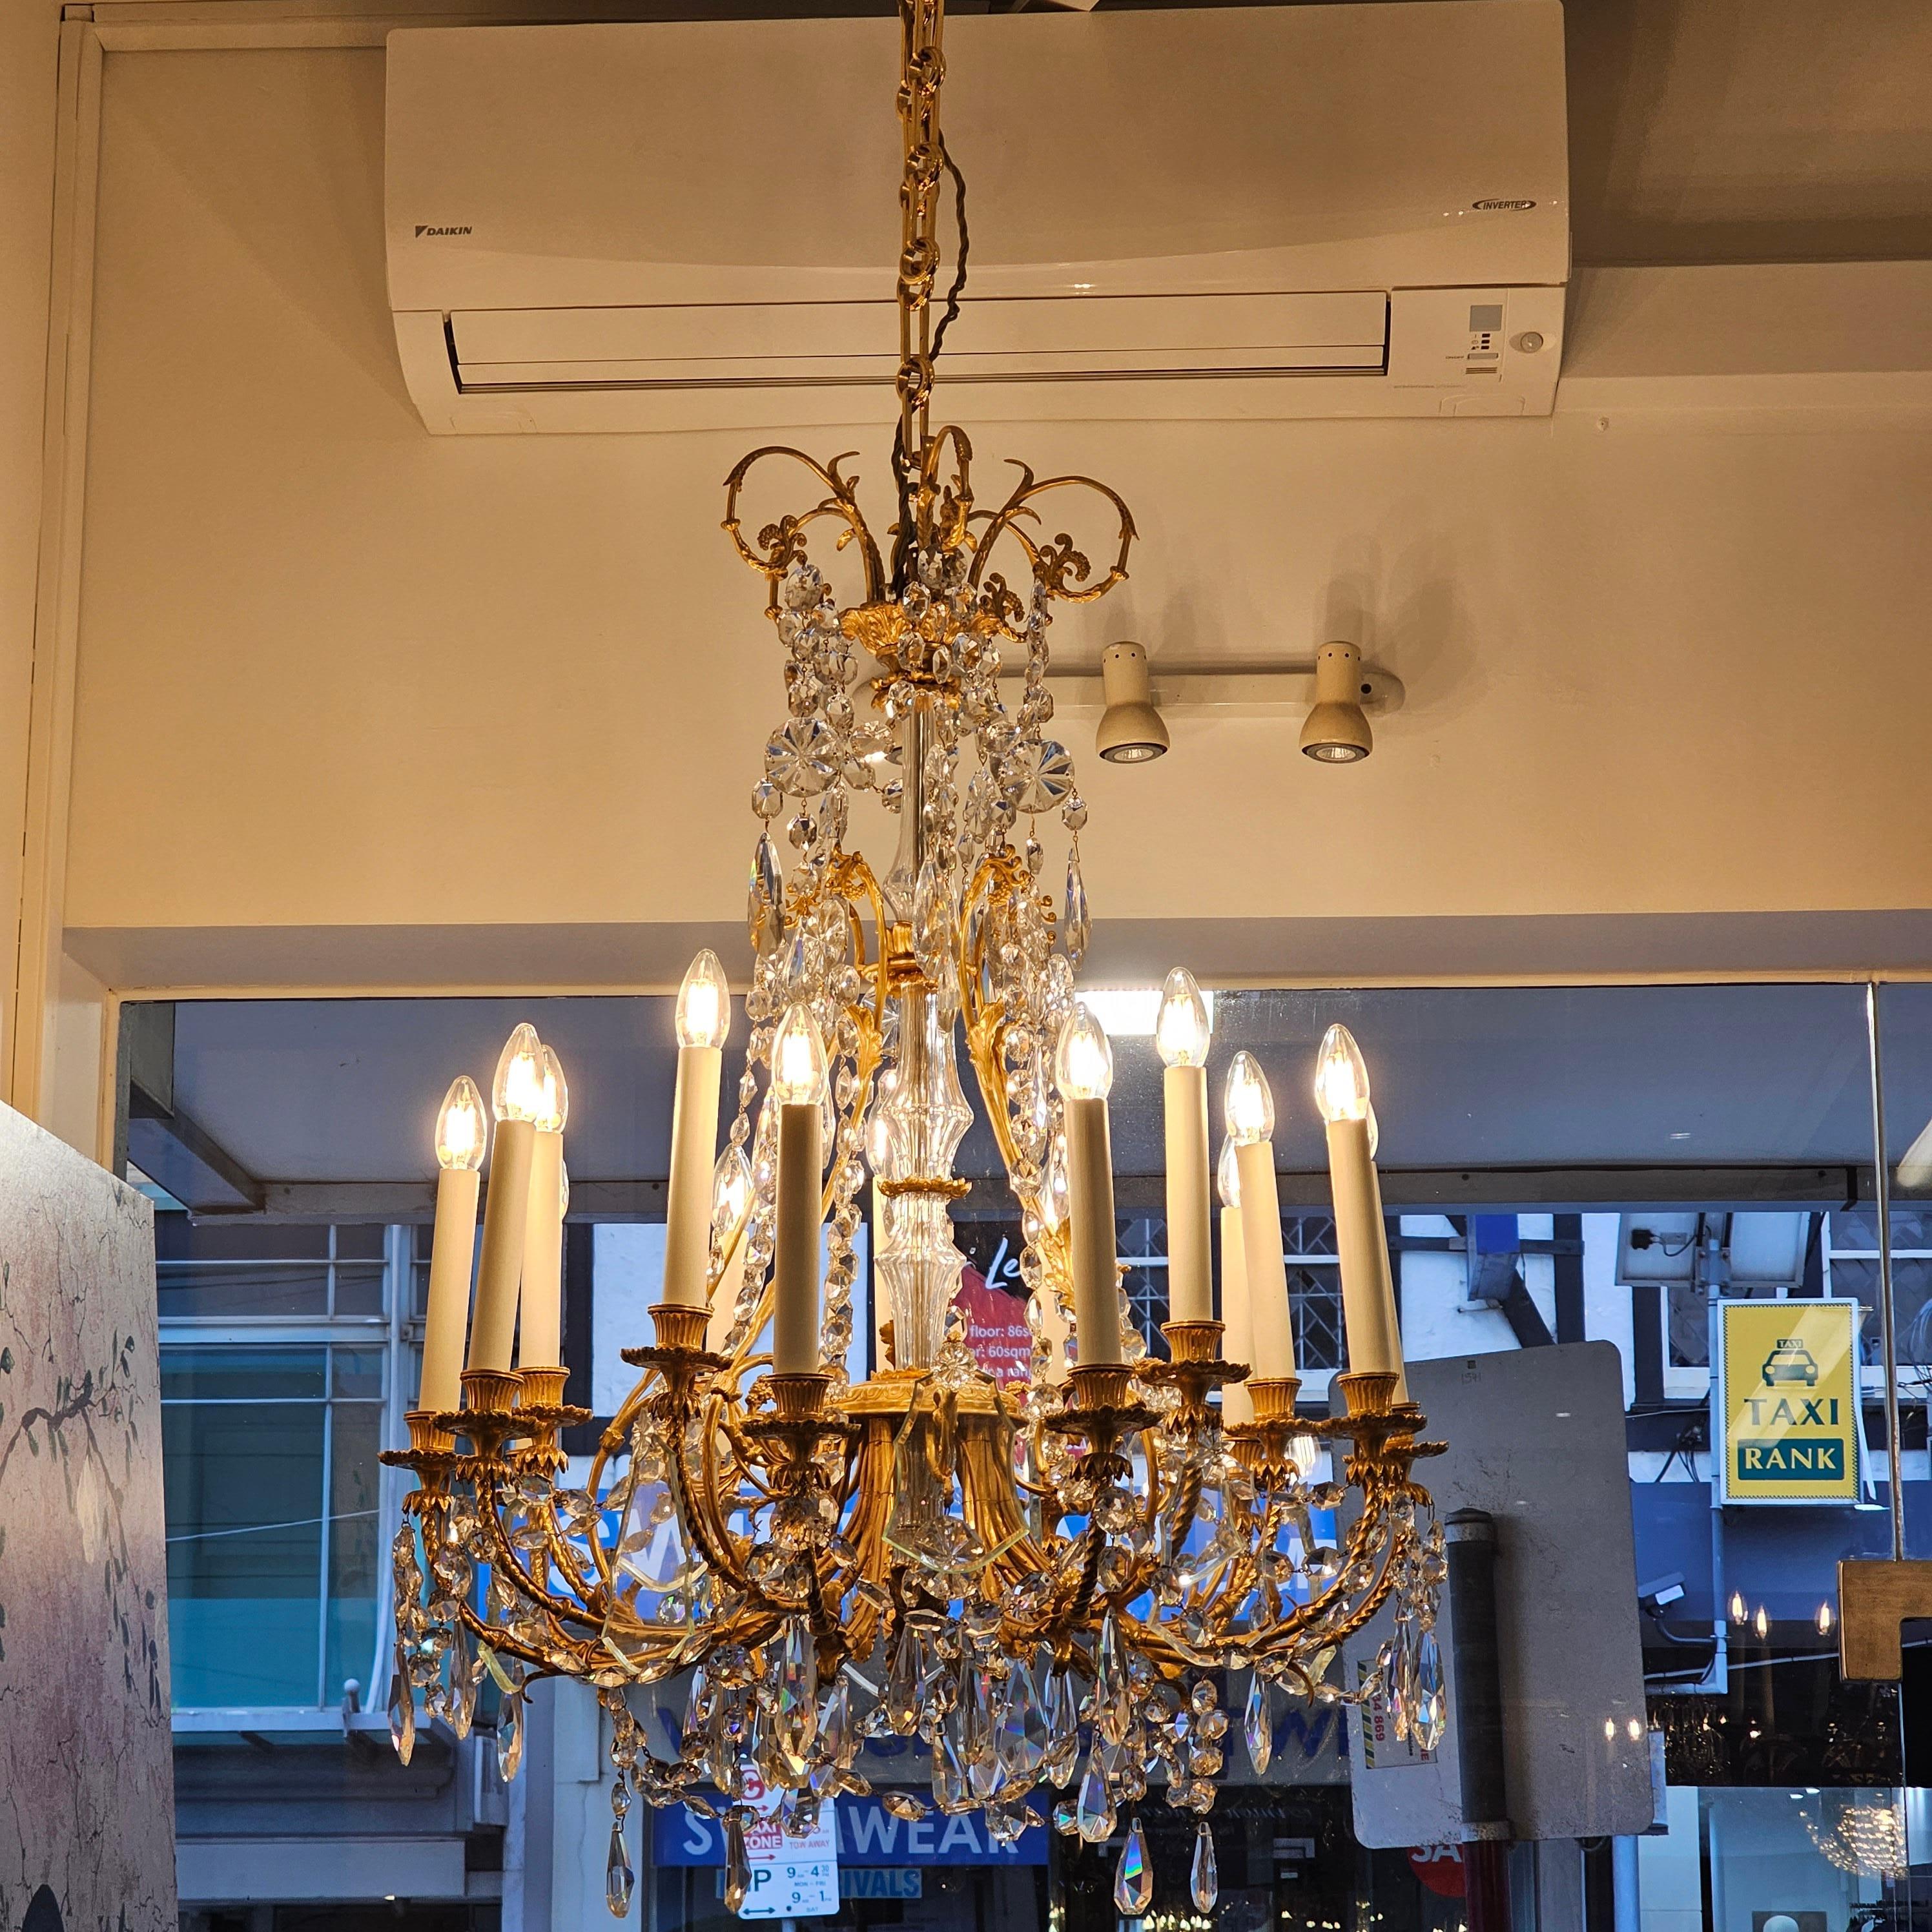 French 19th Century Louis XVI Style Fifteen Light Baccarat Crystal Chandelier

c.19th Century, France

An outstanding and exquisite 19th century French Louis XVI style ormolu and Baccarat crystal fifteen light chandelier with pendant